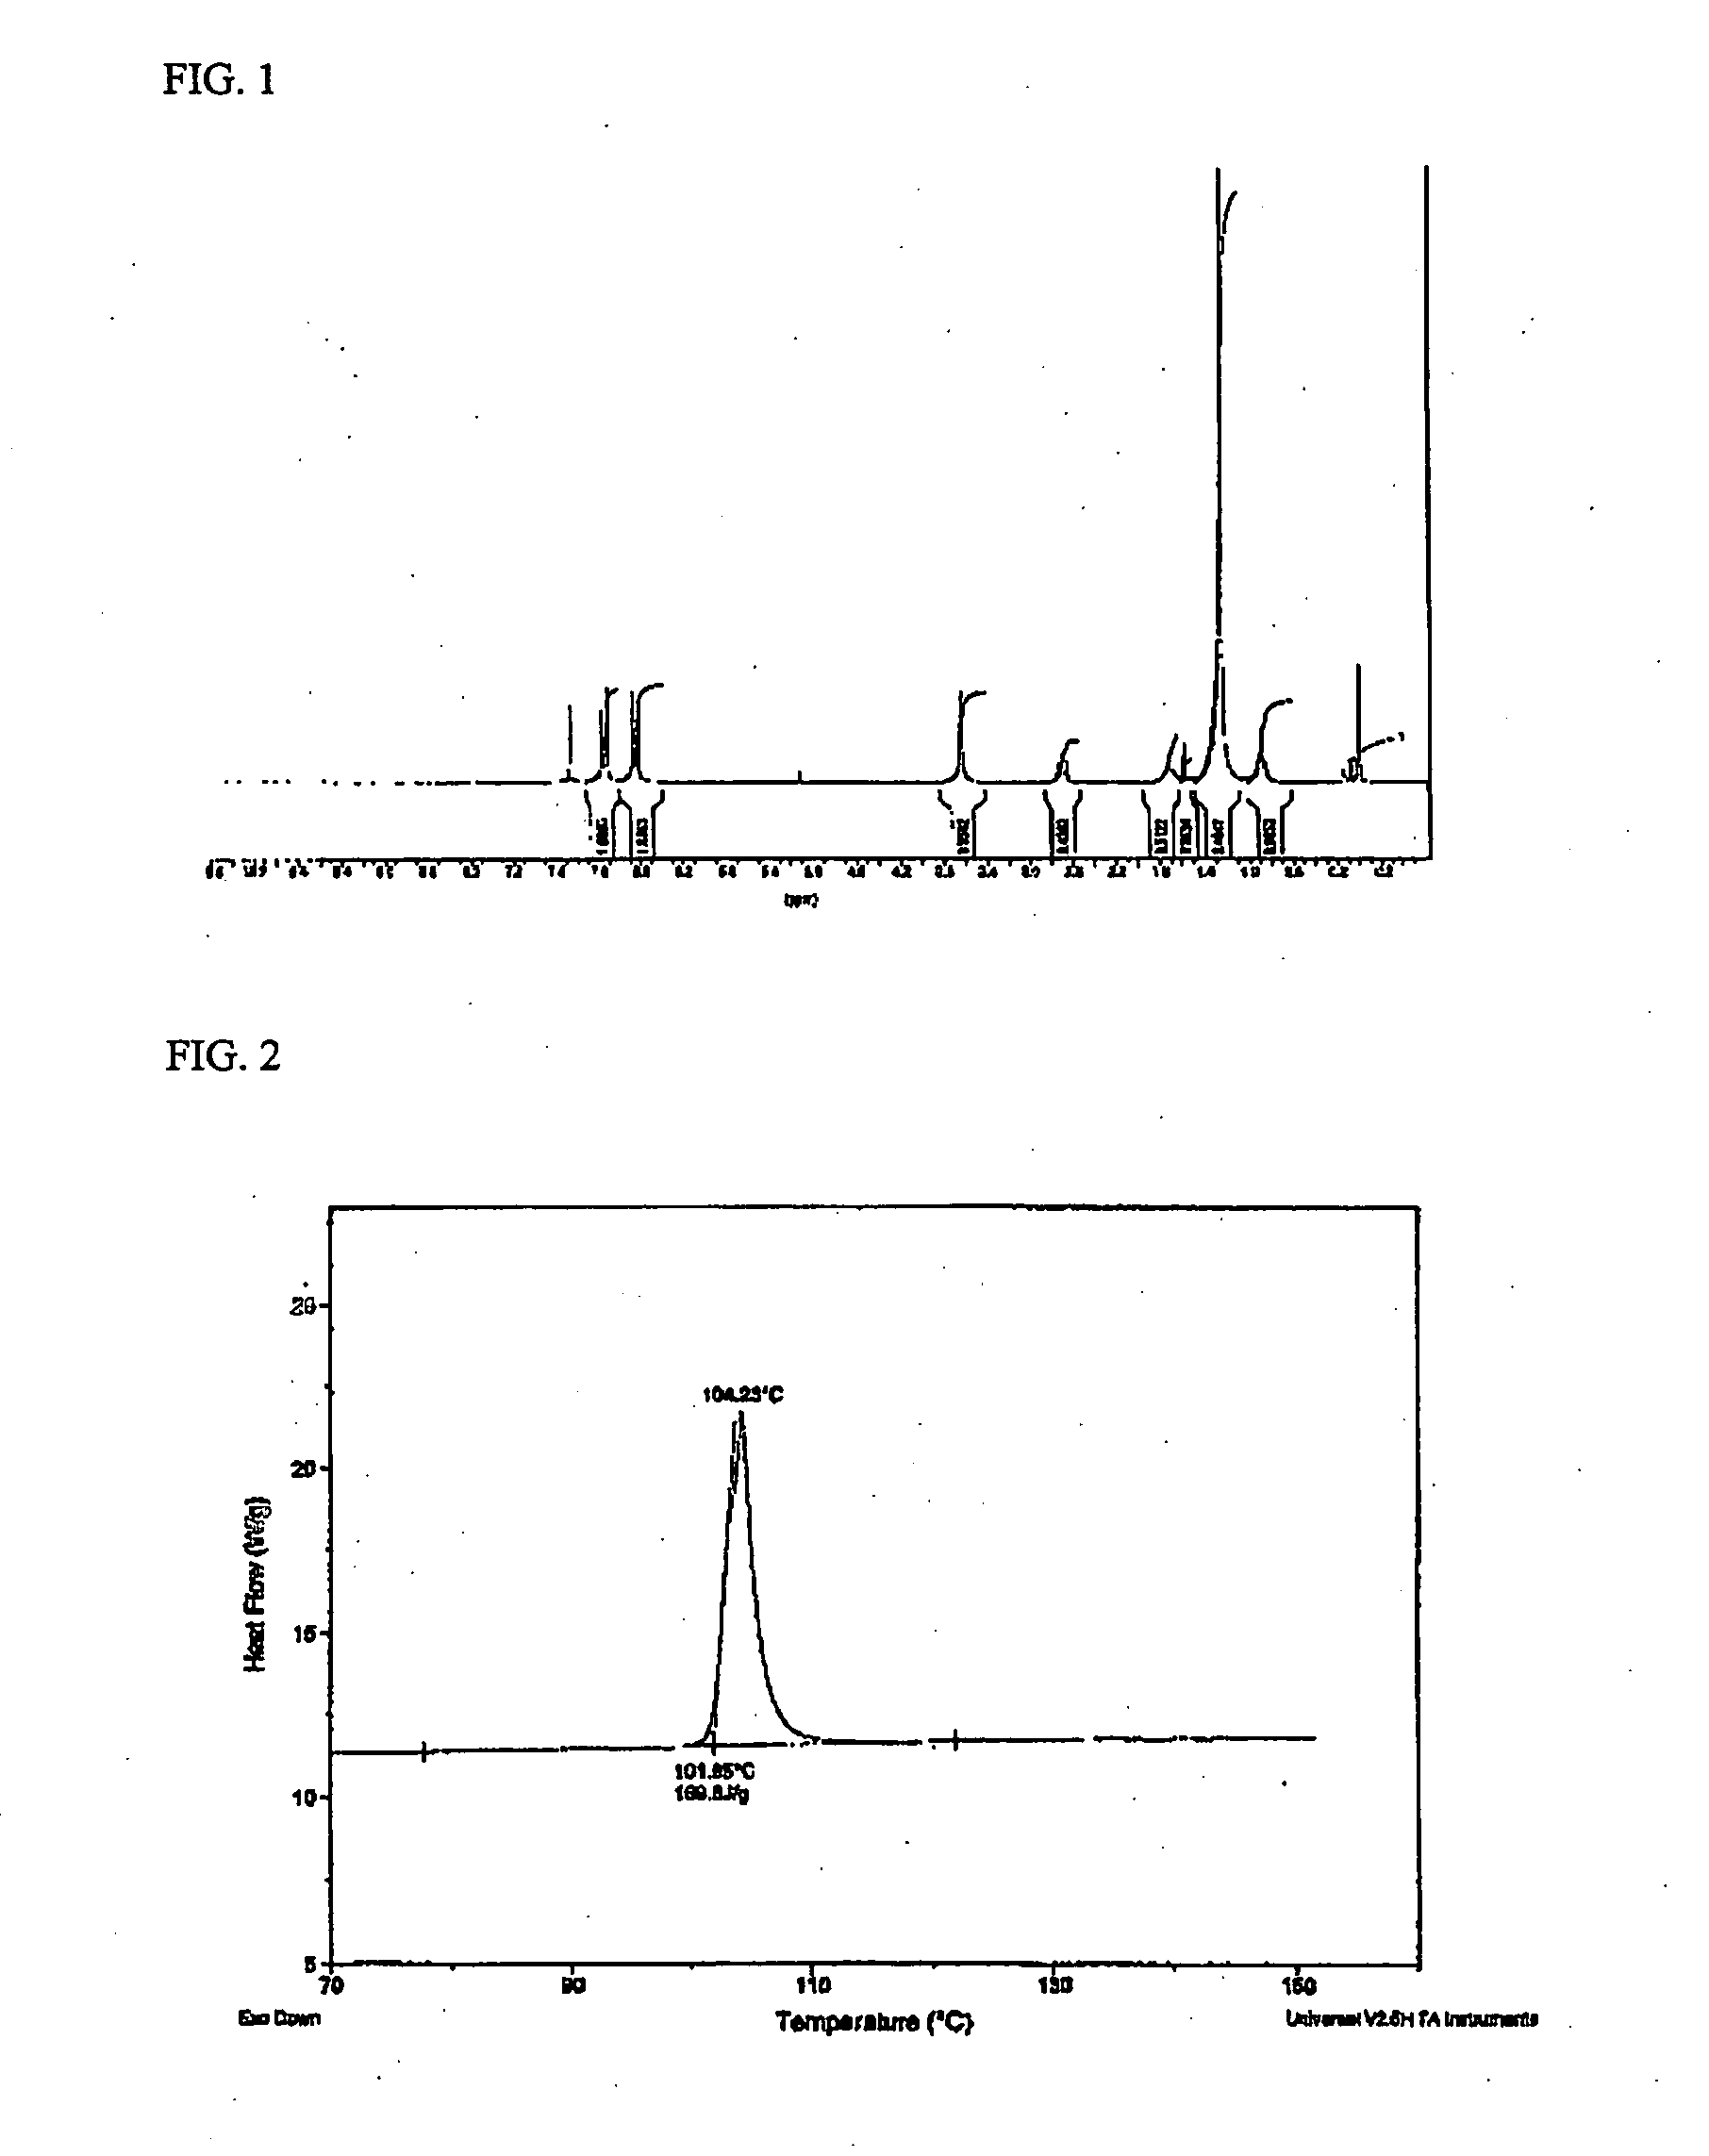 Diamine compound containing triazine group, polyamic acid synthesized from the diamine compound and lc alignment film prepared from the polyamic acid